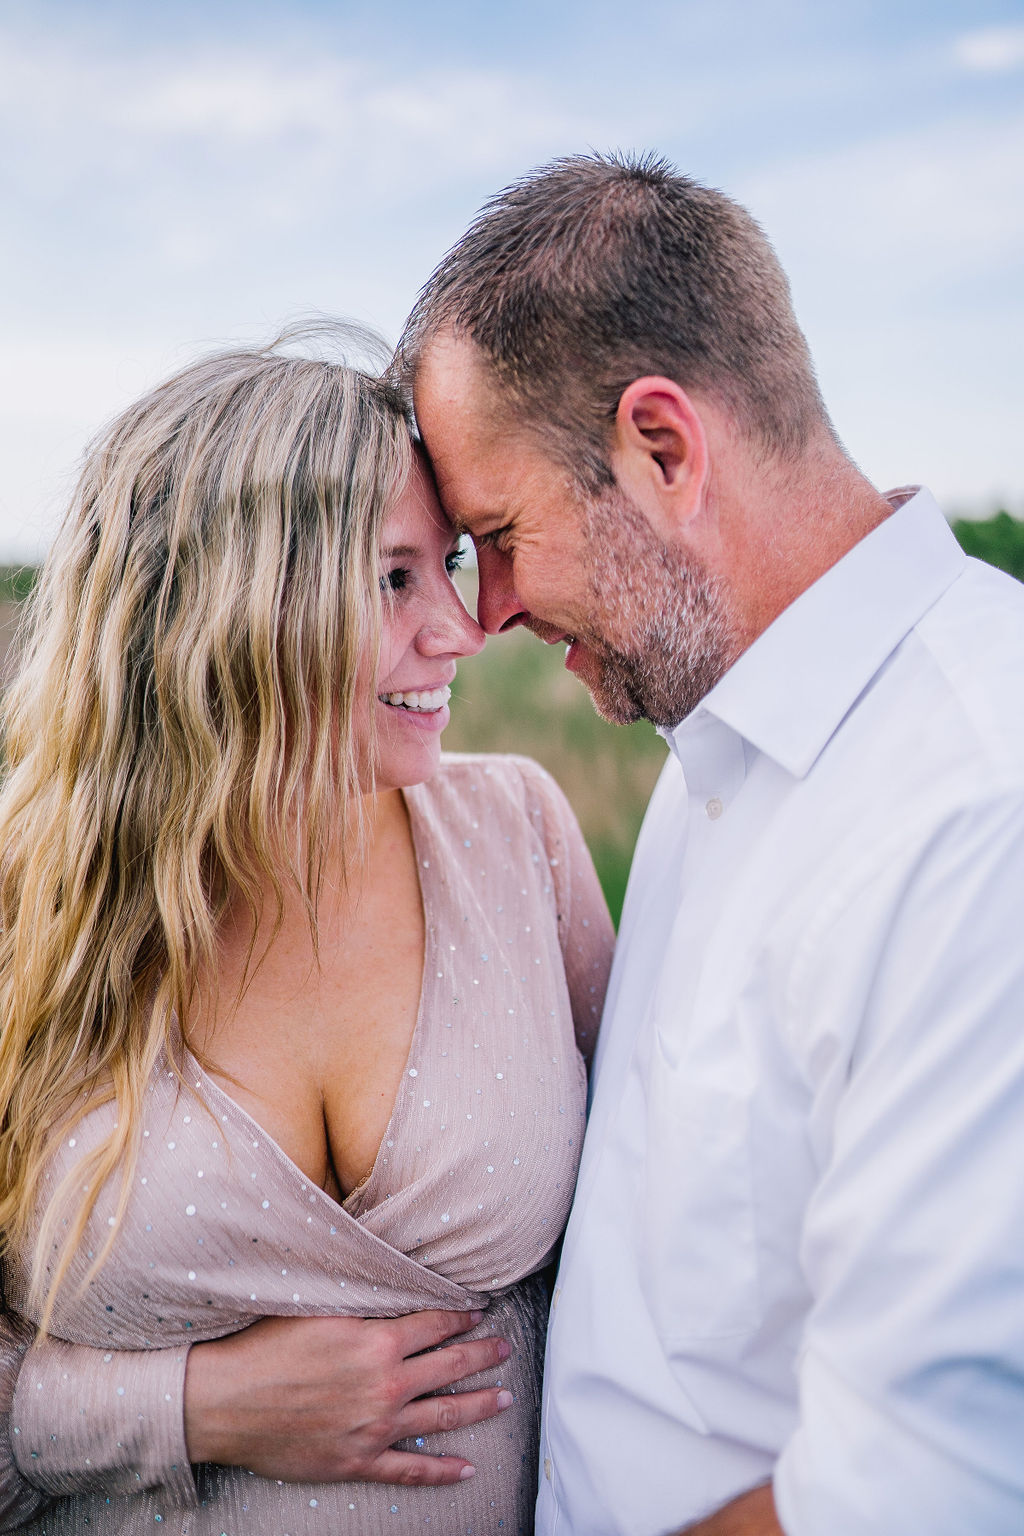 Outerbanks maternity session. Husband and wife are forehead to forehead and the woman holds her pregnancy bump in her pink formal gown.